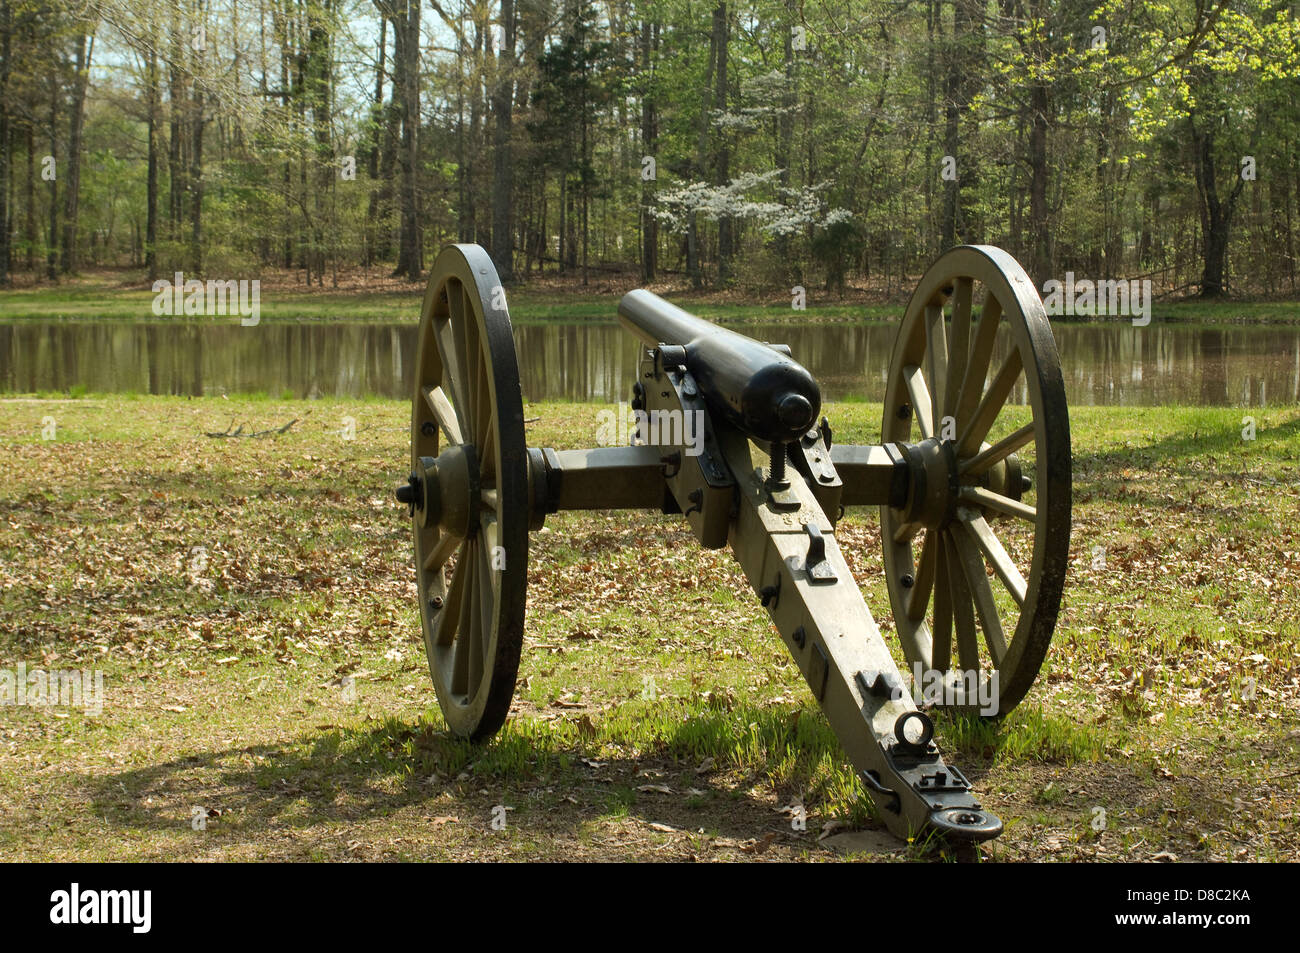 Cannon at Bloody Pond on the battlefield at Shiloh National Military Park, Tennessee. Digital photograph Stock Photo